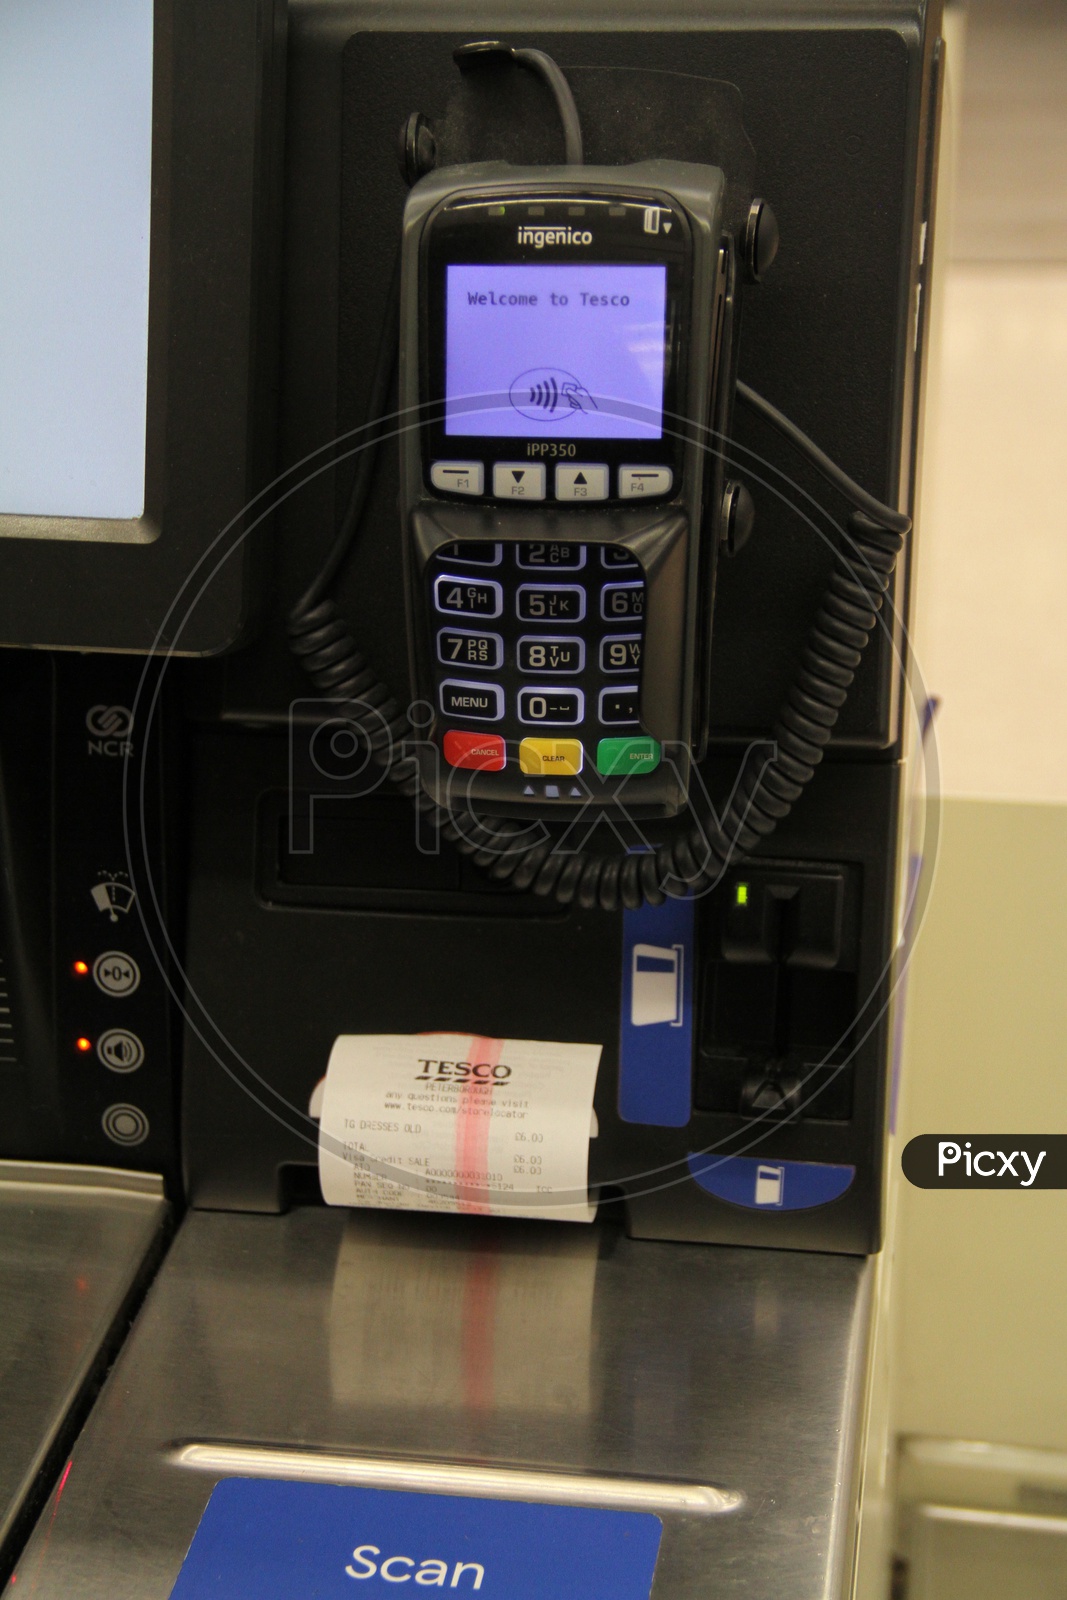 Ingenico POS Machine in a Shopping Mall